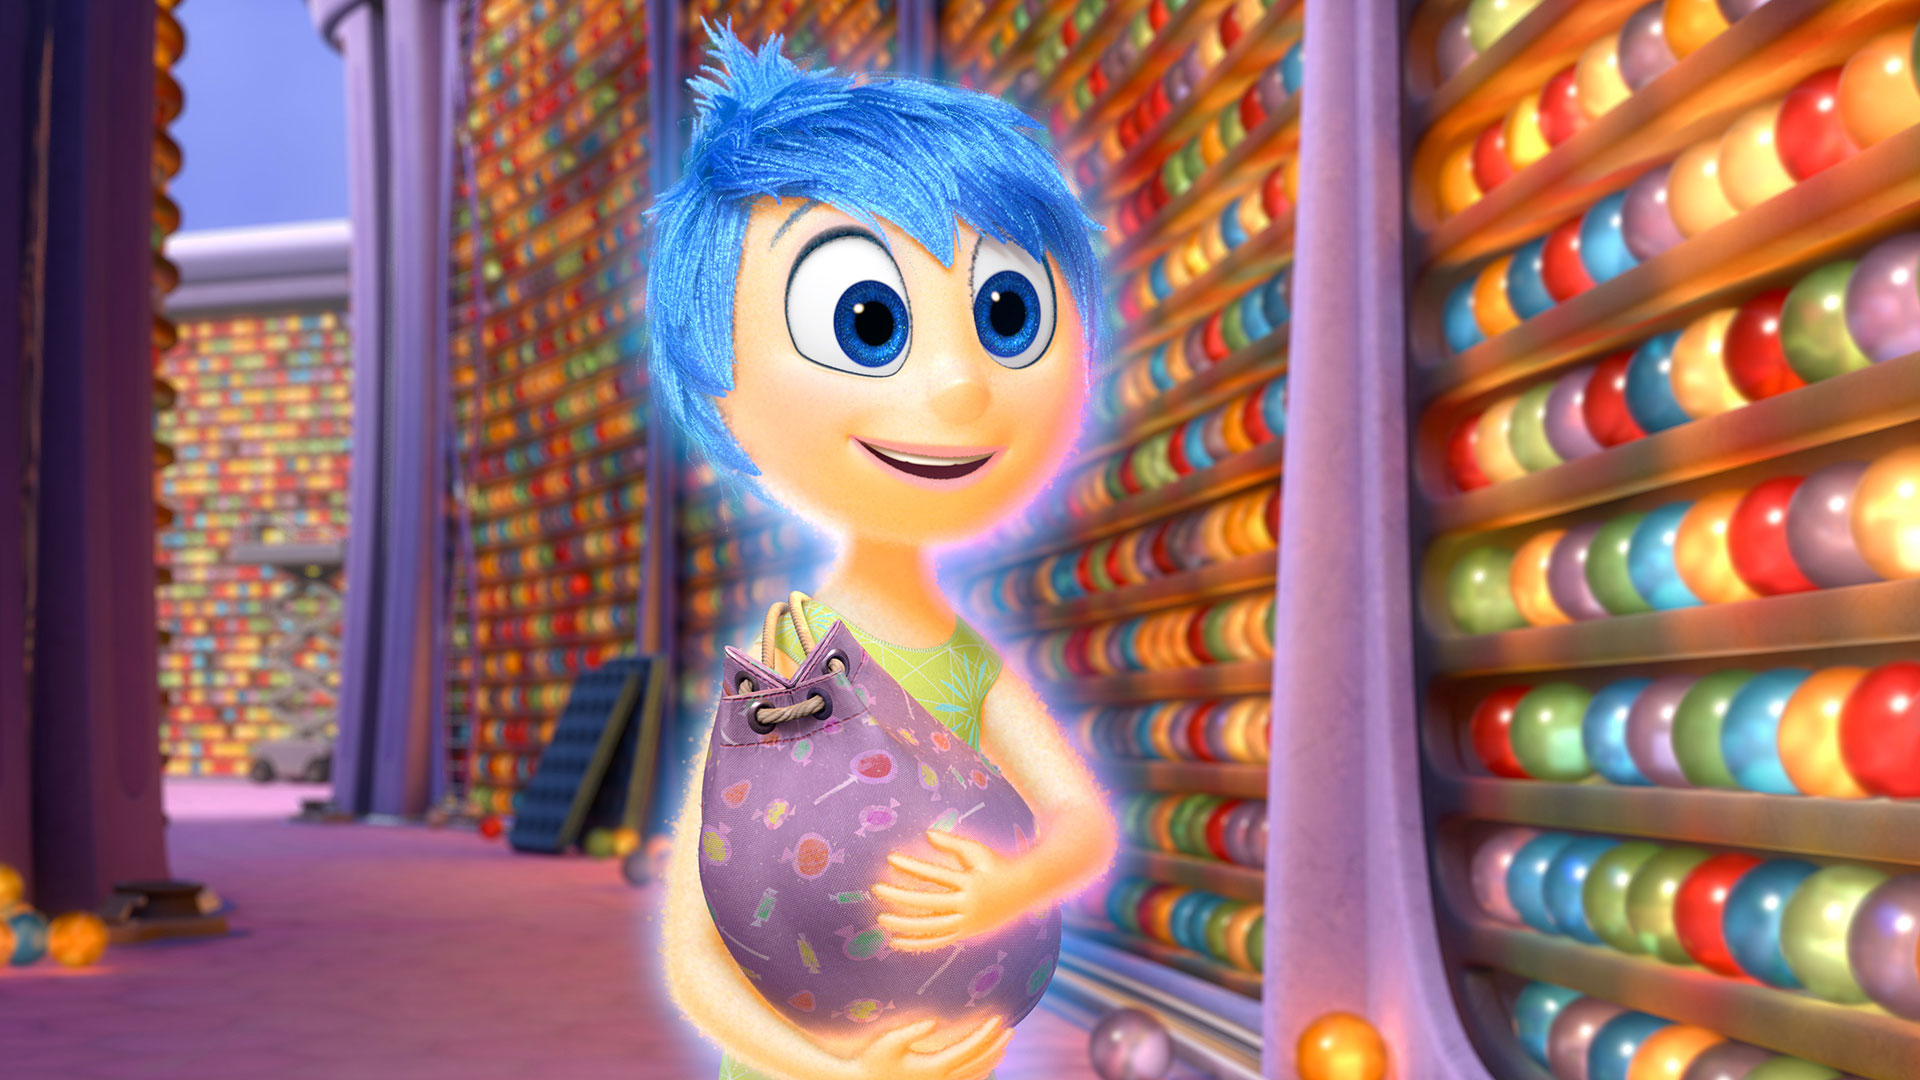  Movie Inside Out 2015 Desktop Backgrounds iPhone 6 Wallpapers HD 1920x1080